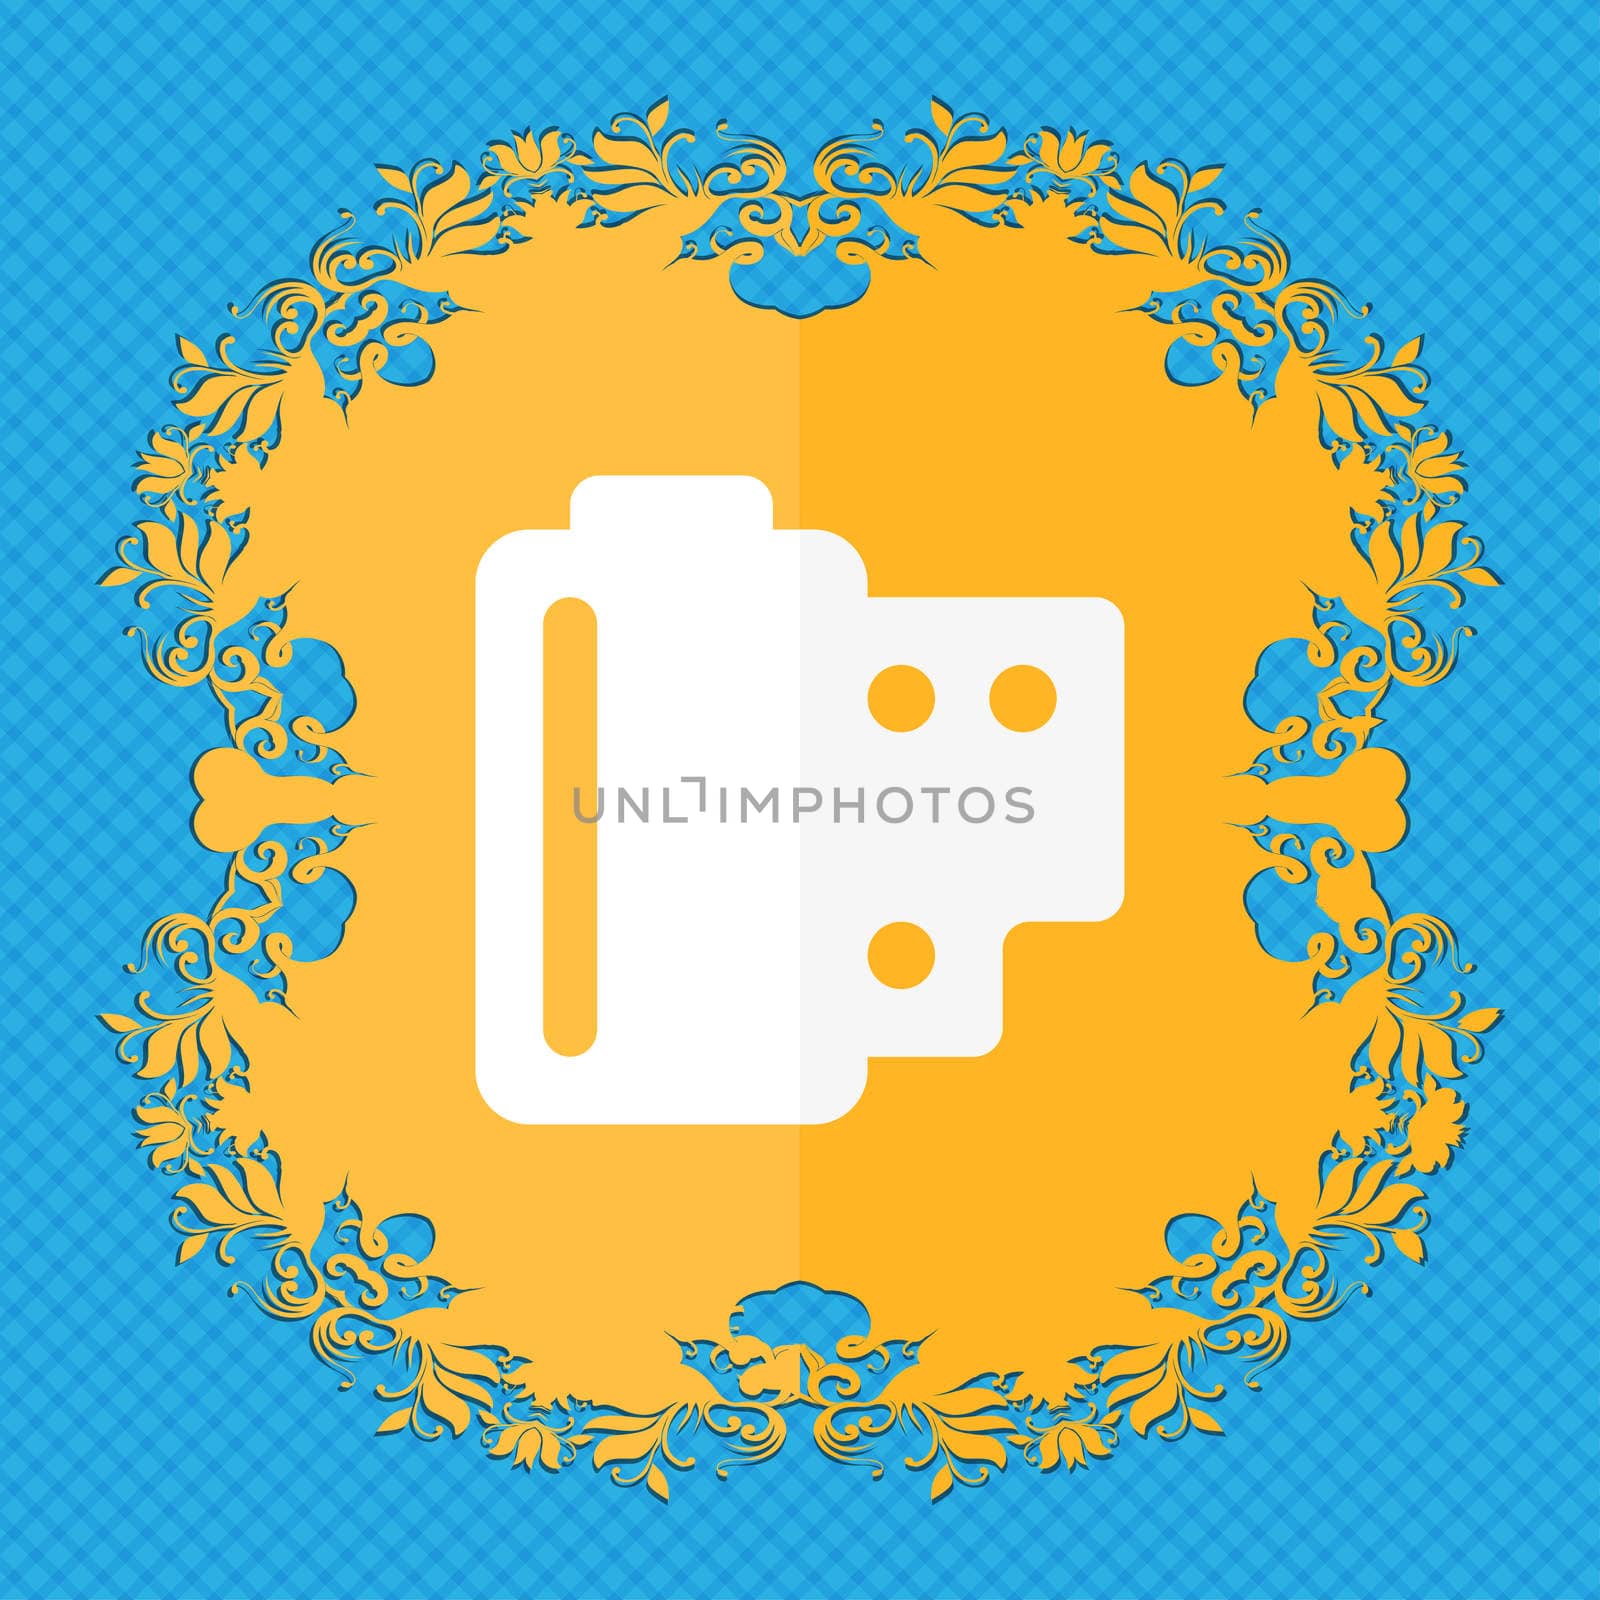 35 mm negative films . Floral flat design on a blue abstract background with place for your text. illustration